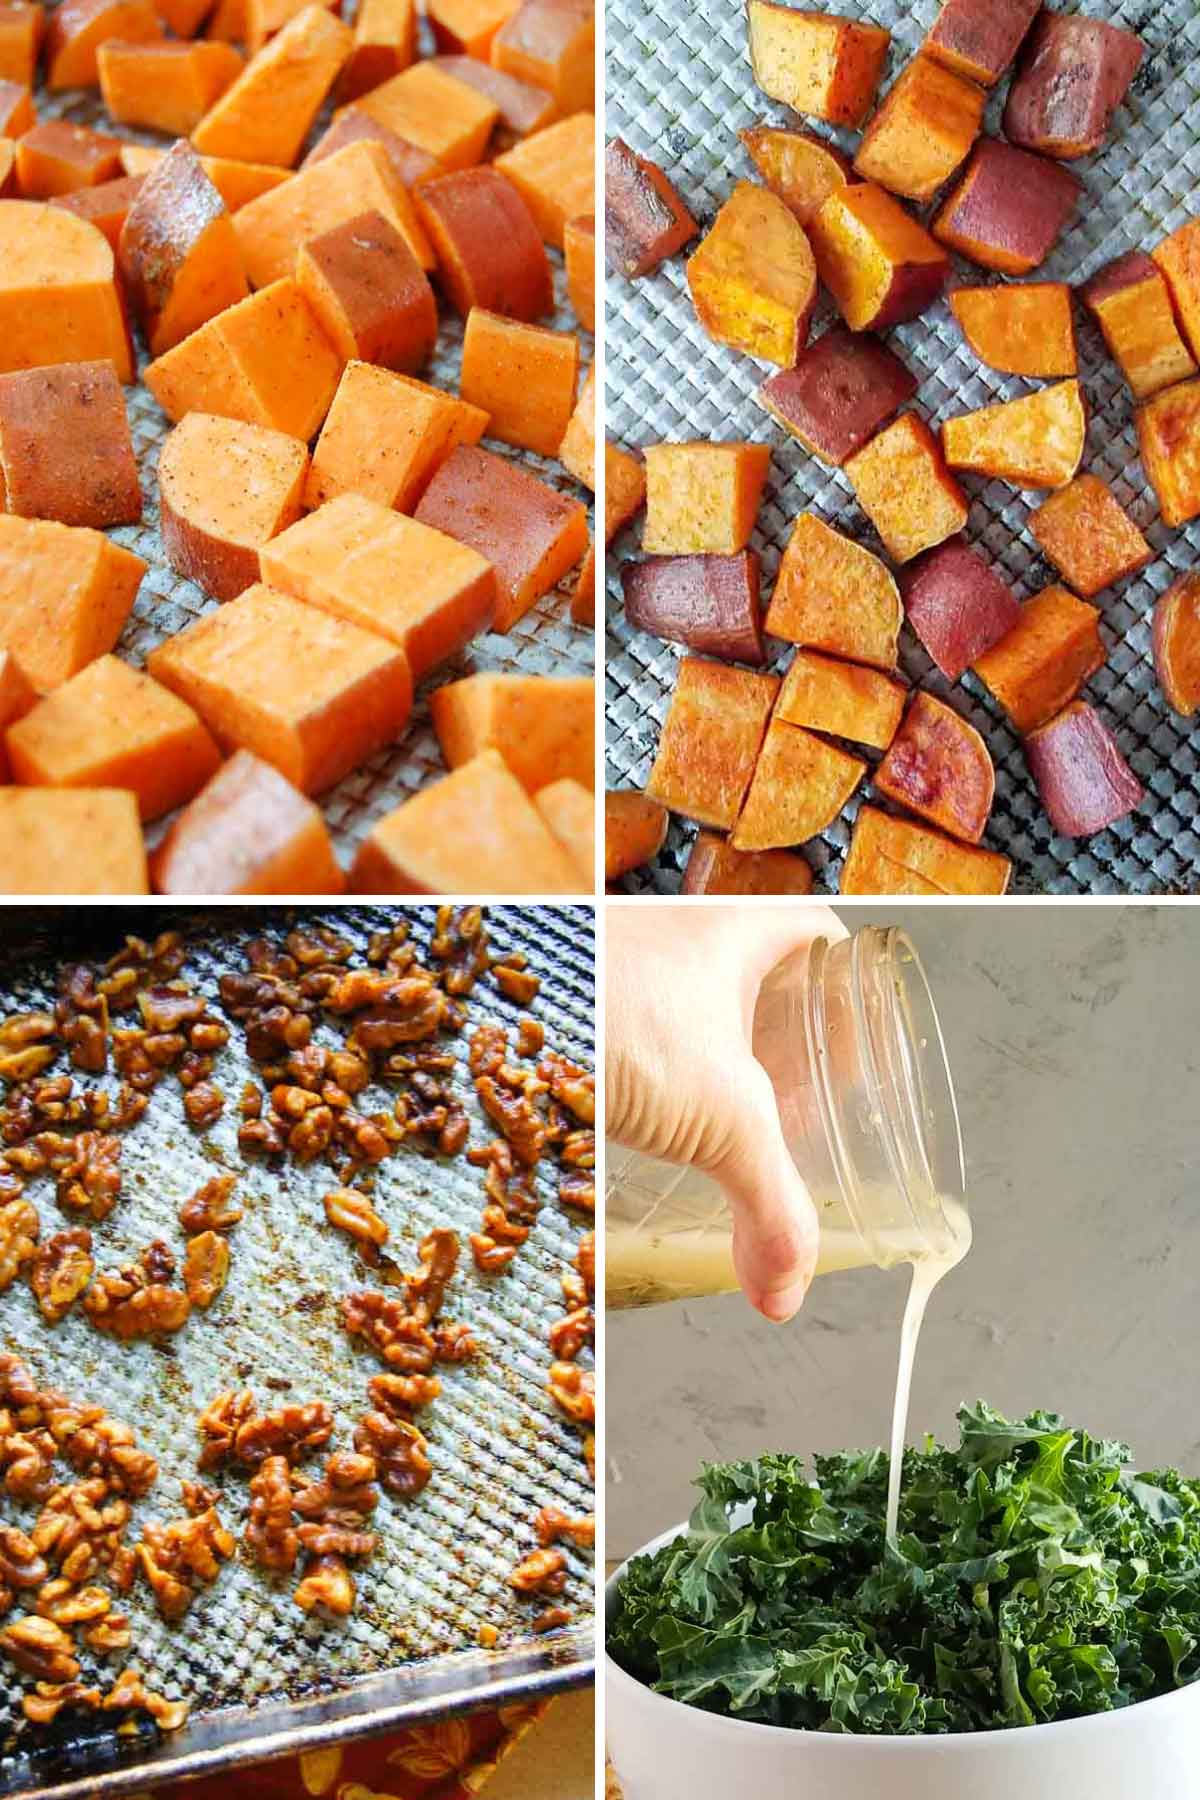 Sweet potatoes and walnuts on baking sheets and person pouring salad dressing on fresh kale.